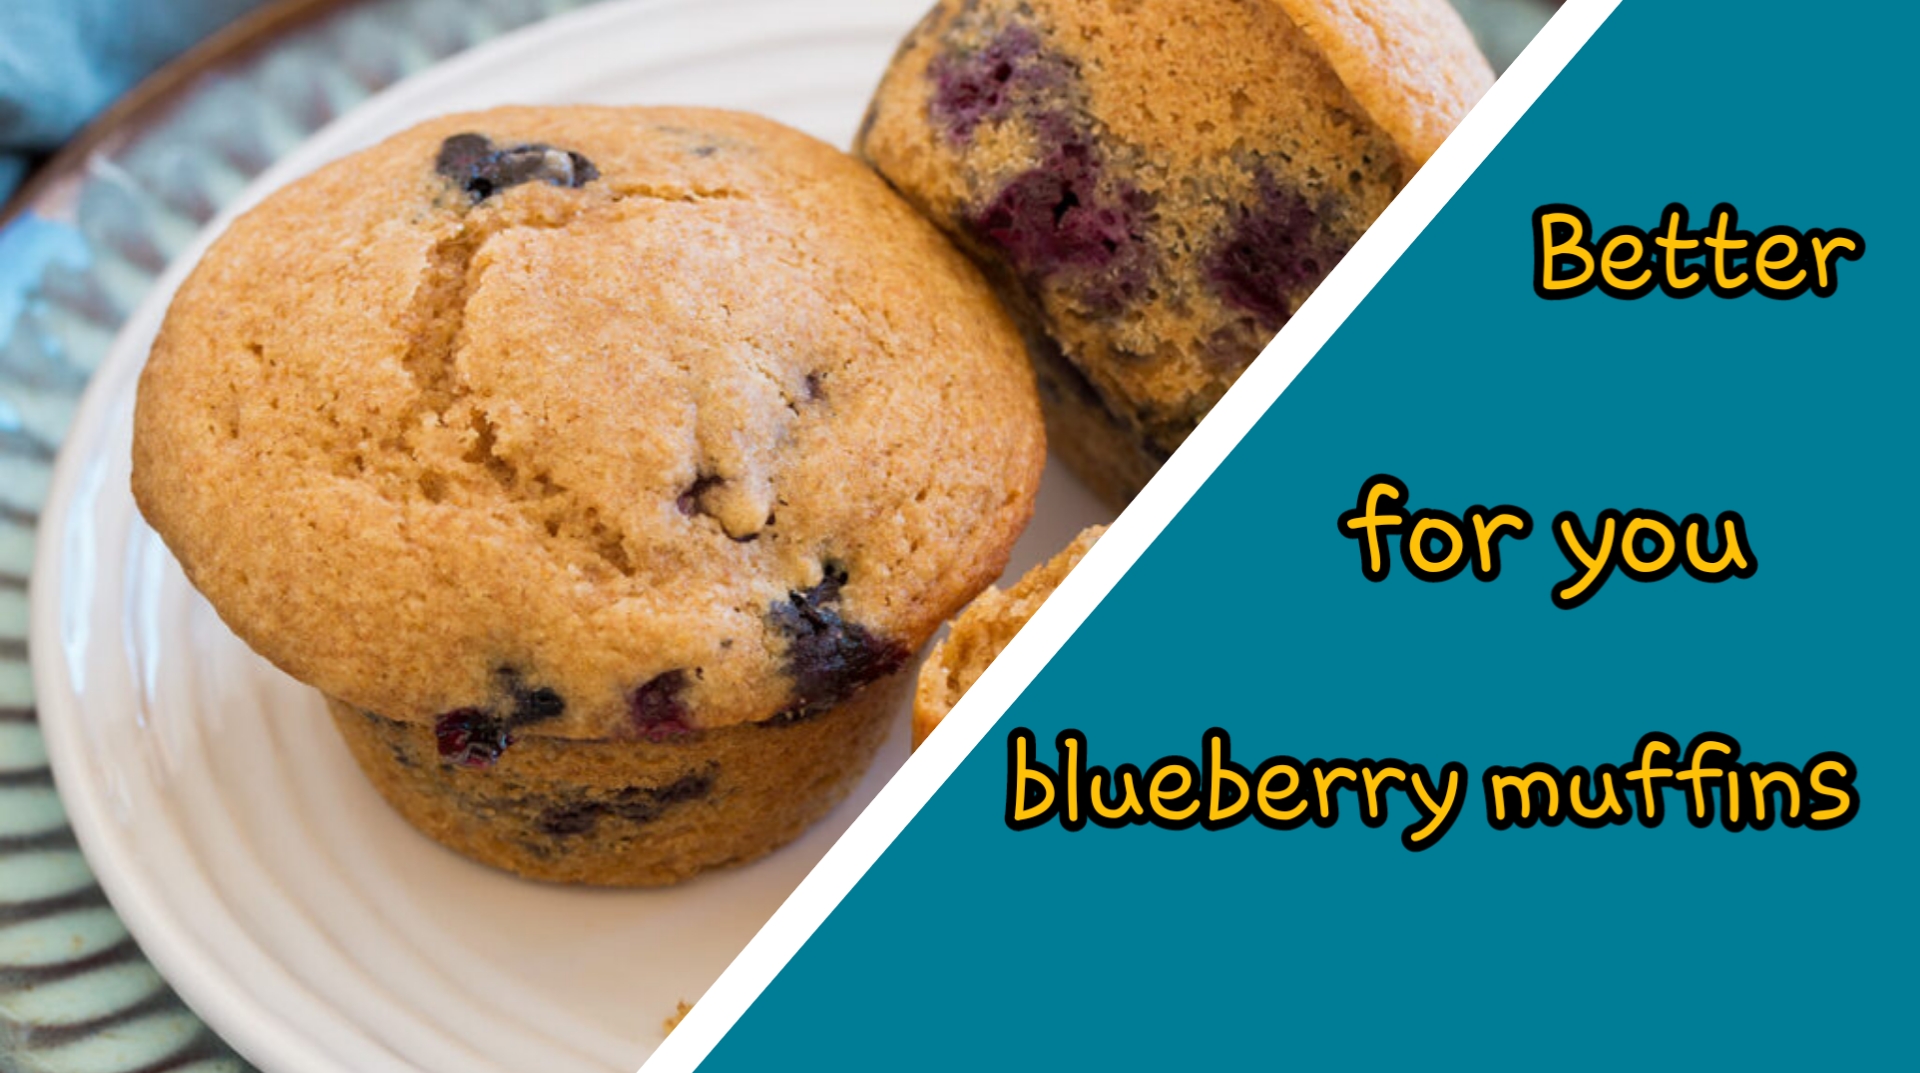 Better-for-you blueberry muffins